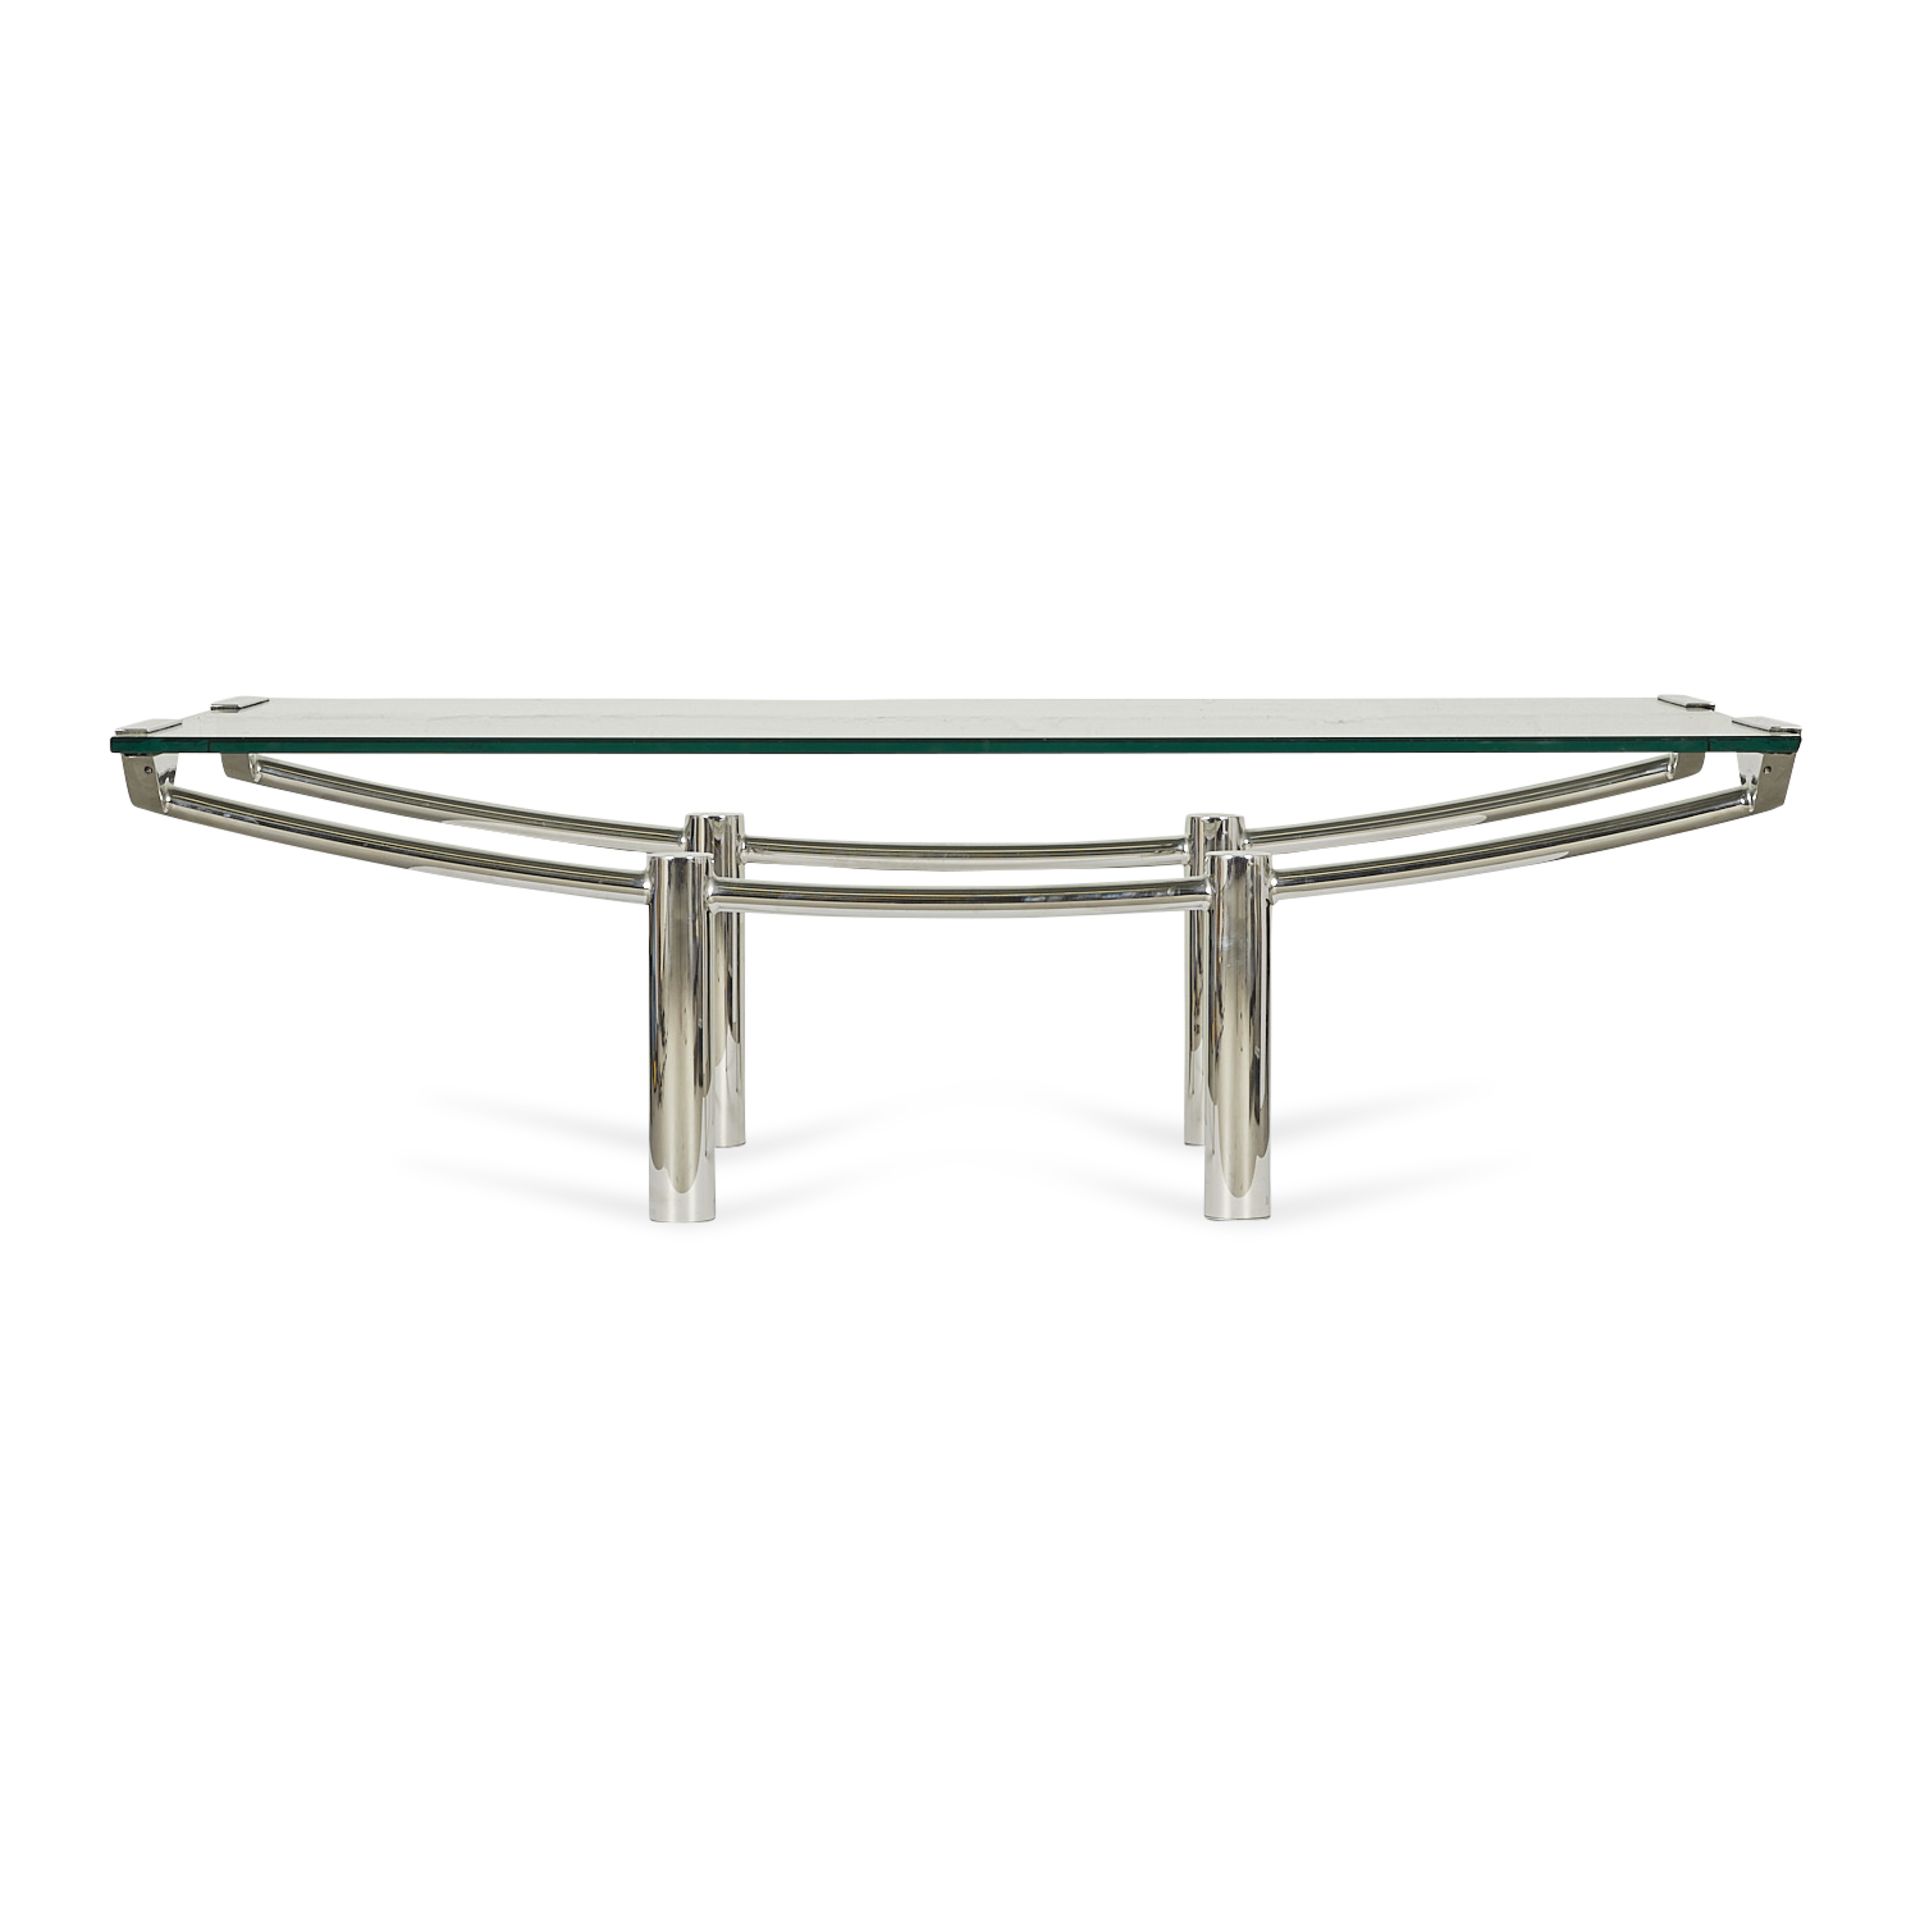 Brueton "Structures" Low Coffee Table w/ Glass Top - Image 5 of 12